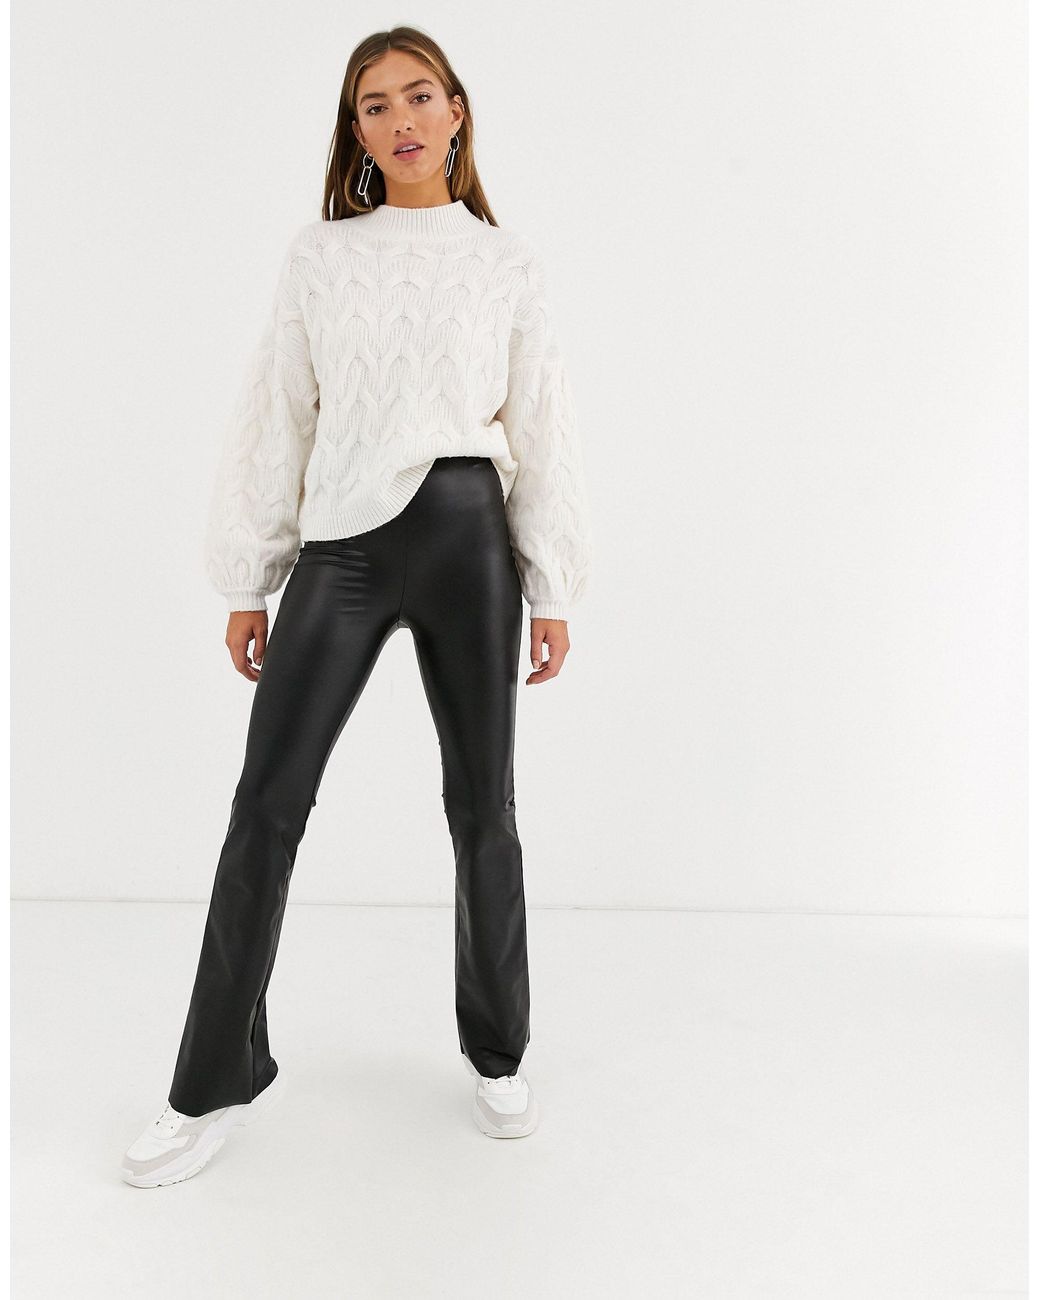 Stradivarius Faux Leather Flare Pants in Black | Lyst